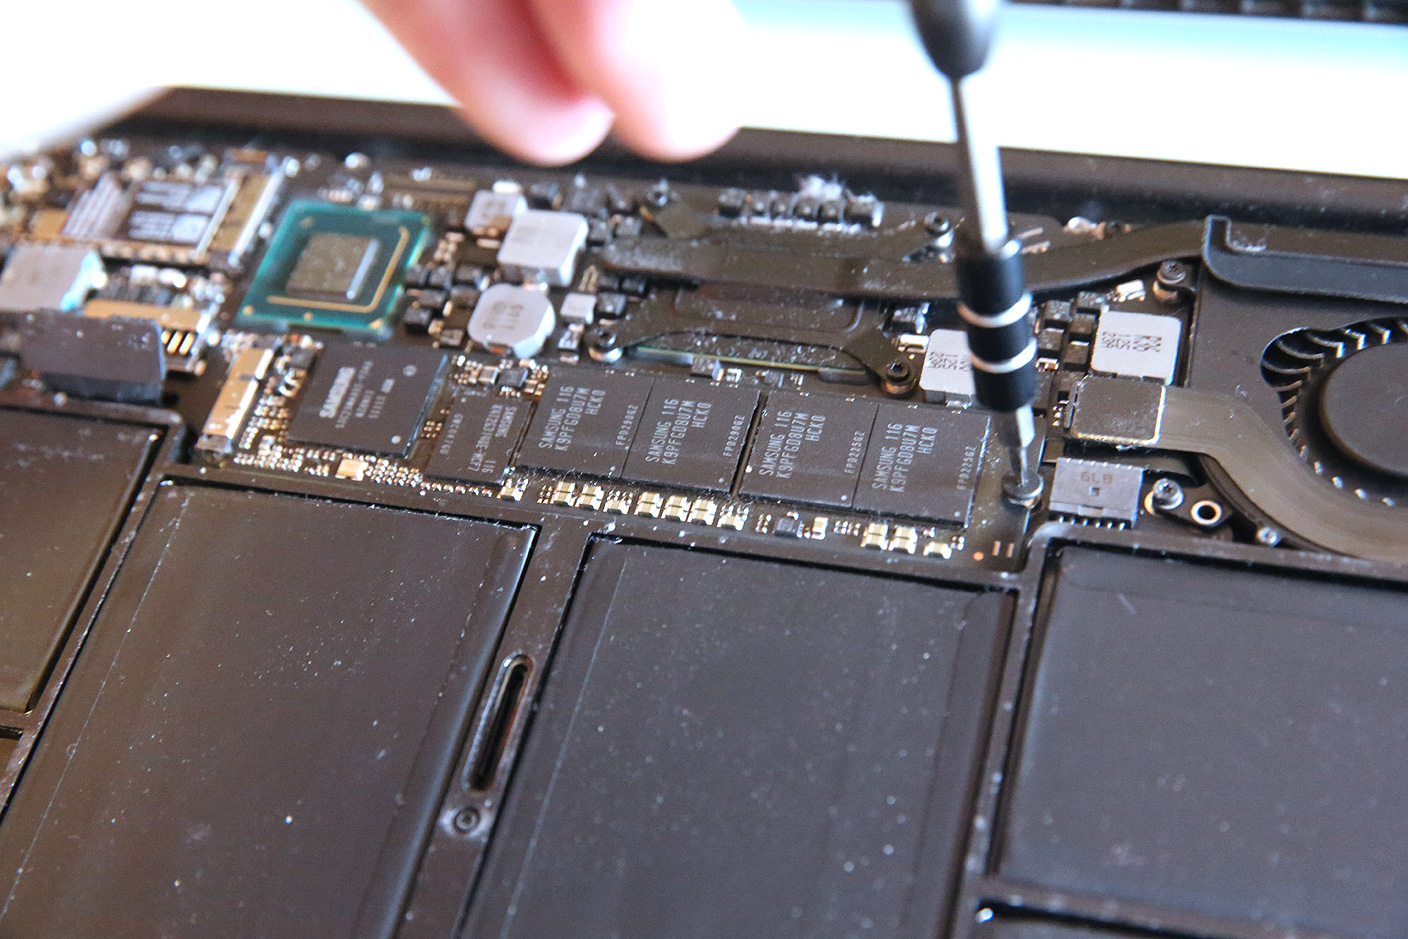 How-To: Upgrade the SSD in MacBook Air or Retina MacBook Pro, boosting size & speed - 9to5Mac